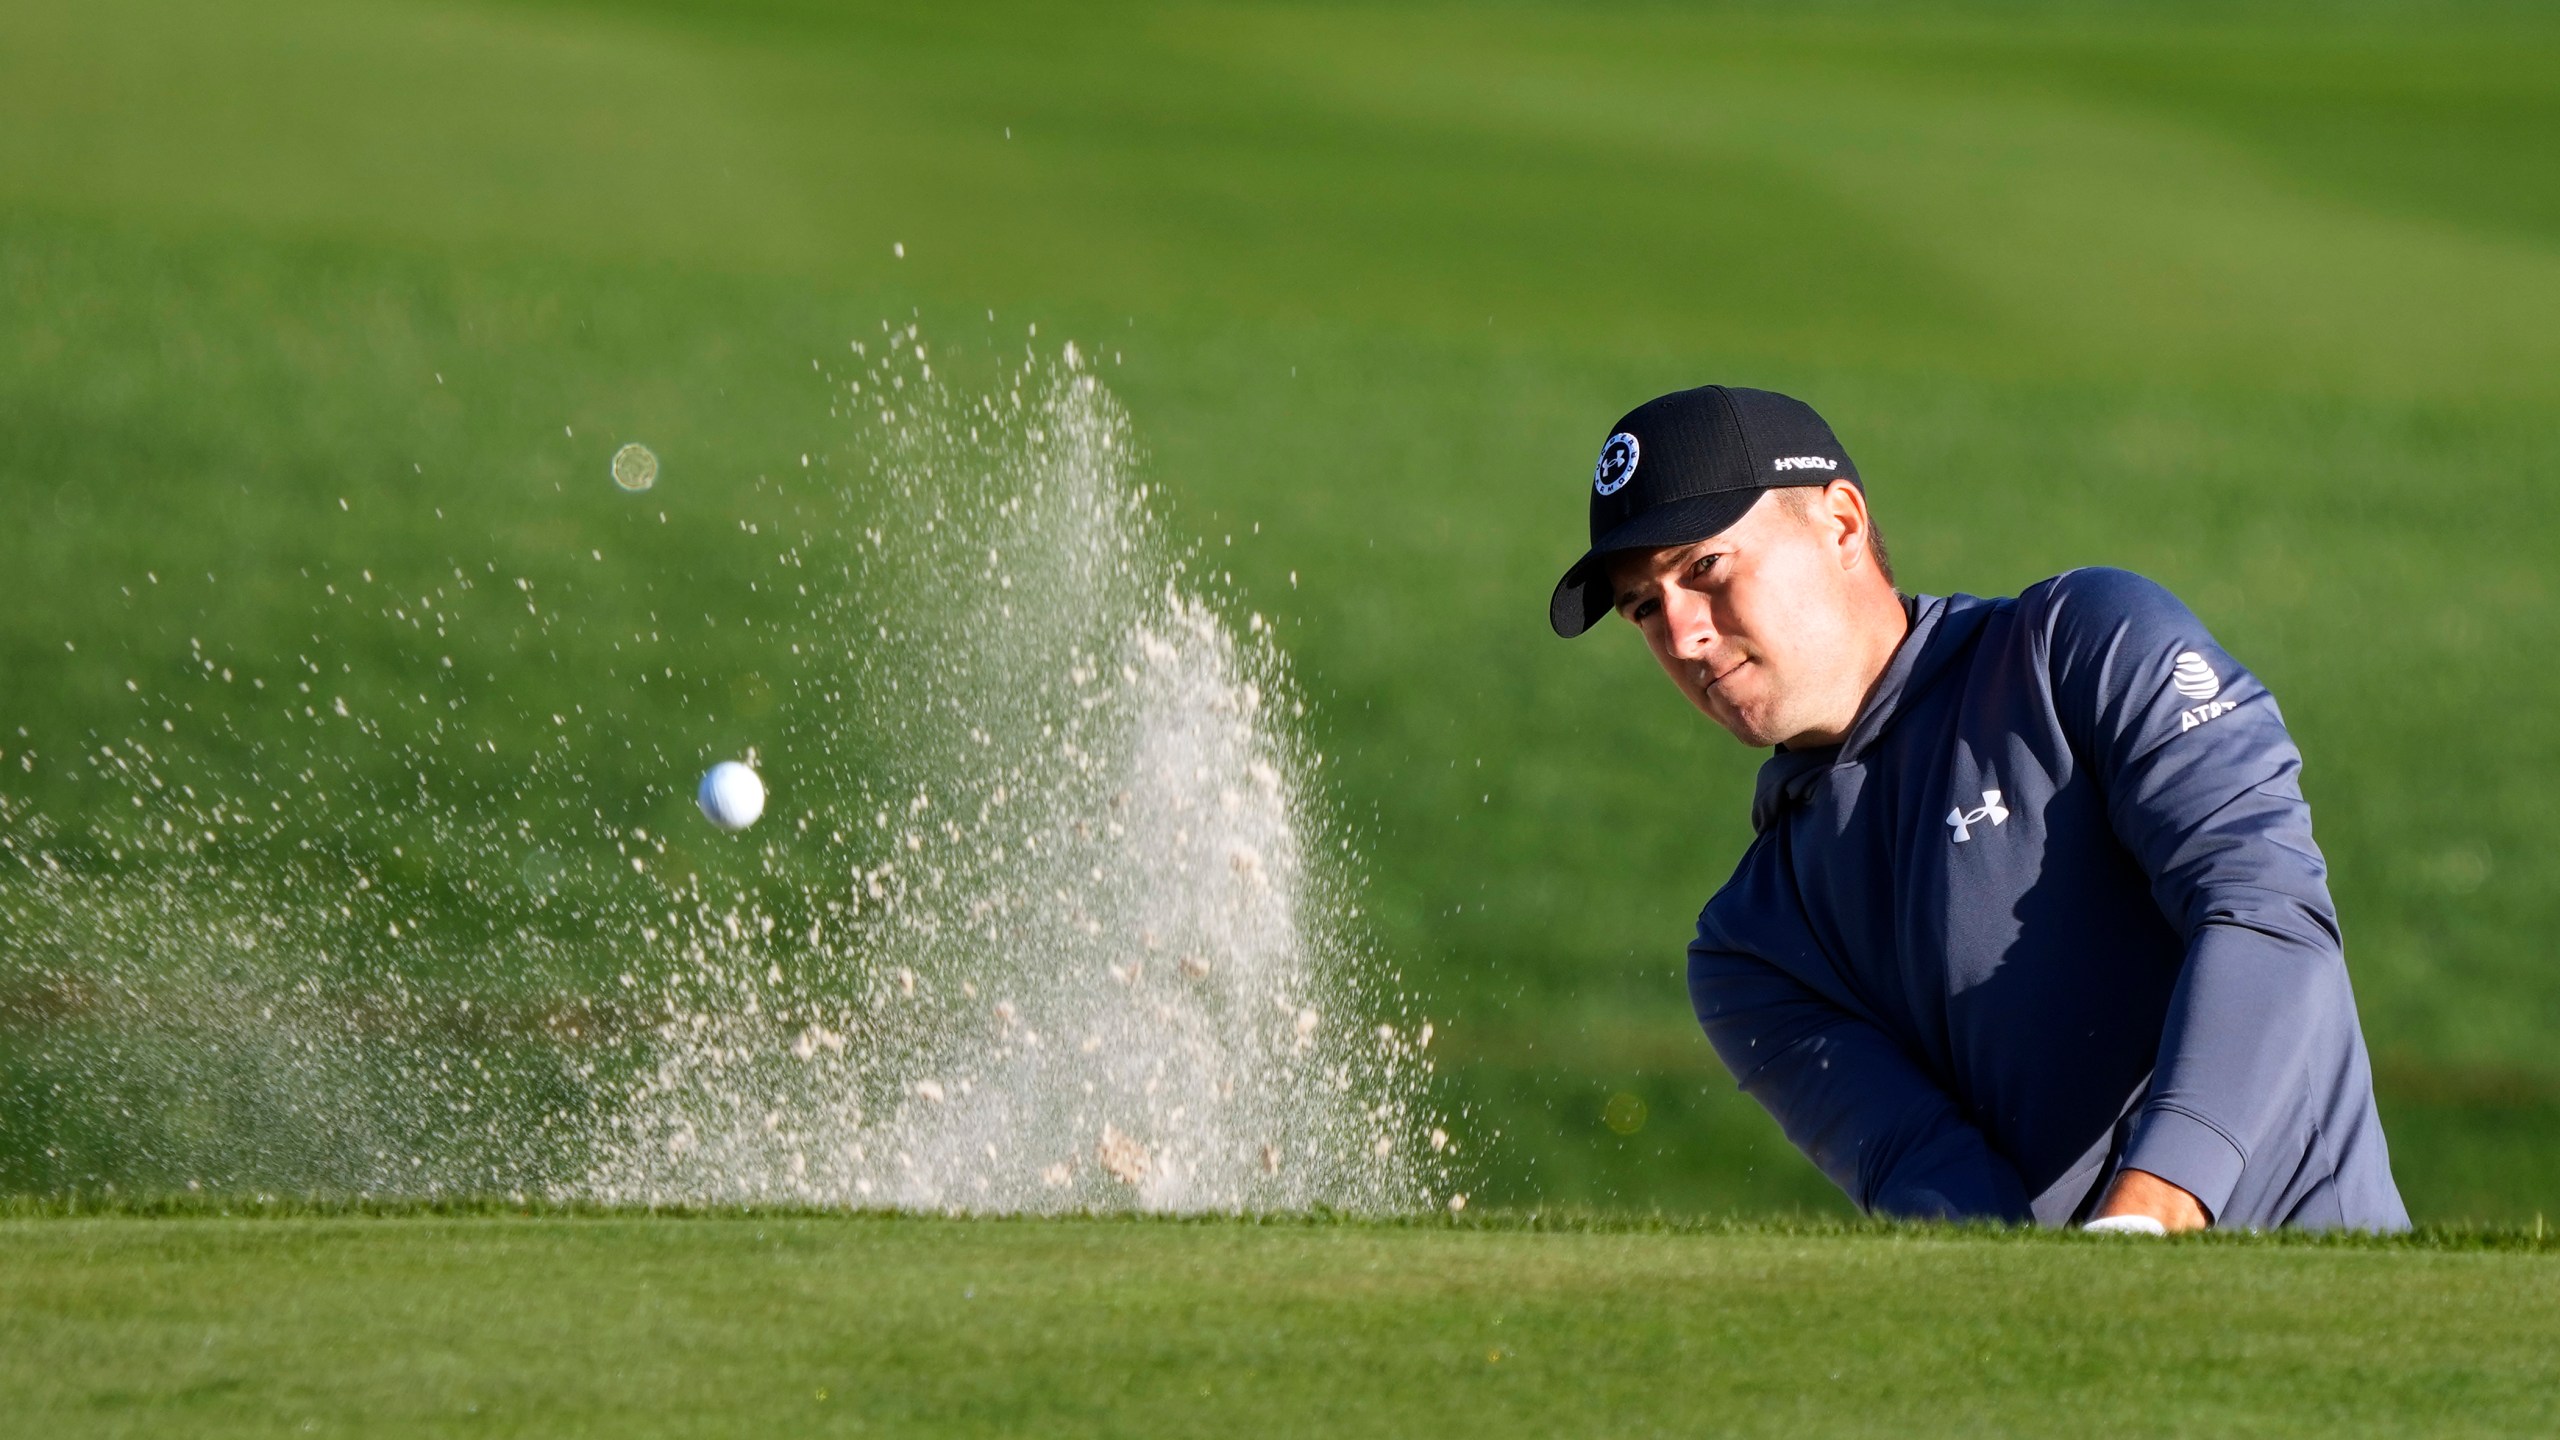 Jordan Spieth blasts from the sand trap along the 11th green during the first round of The Players Championship golf tournament Thursday, March 14, 2024, in Ponte Vedra Beach, Fla. (AP Photo/Lynne Sladky)